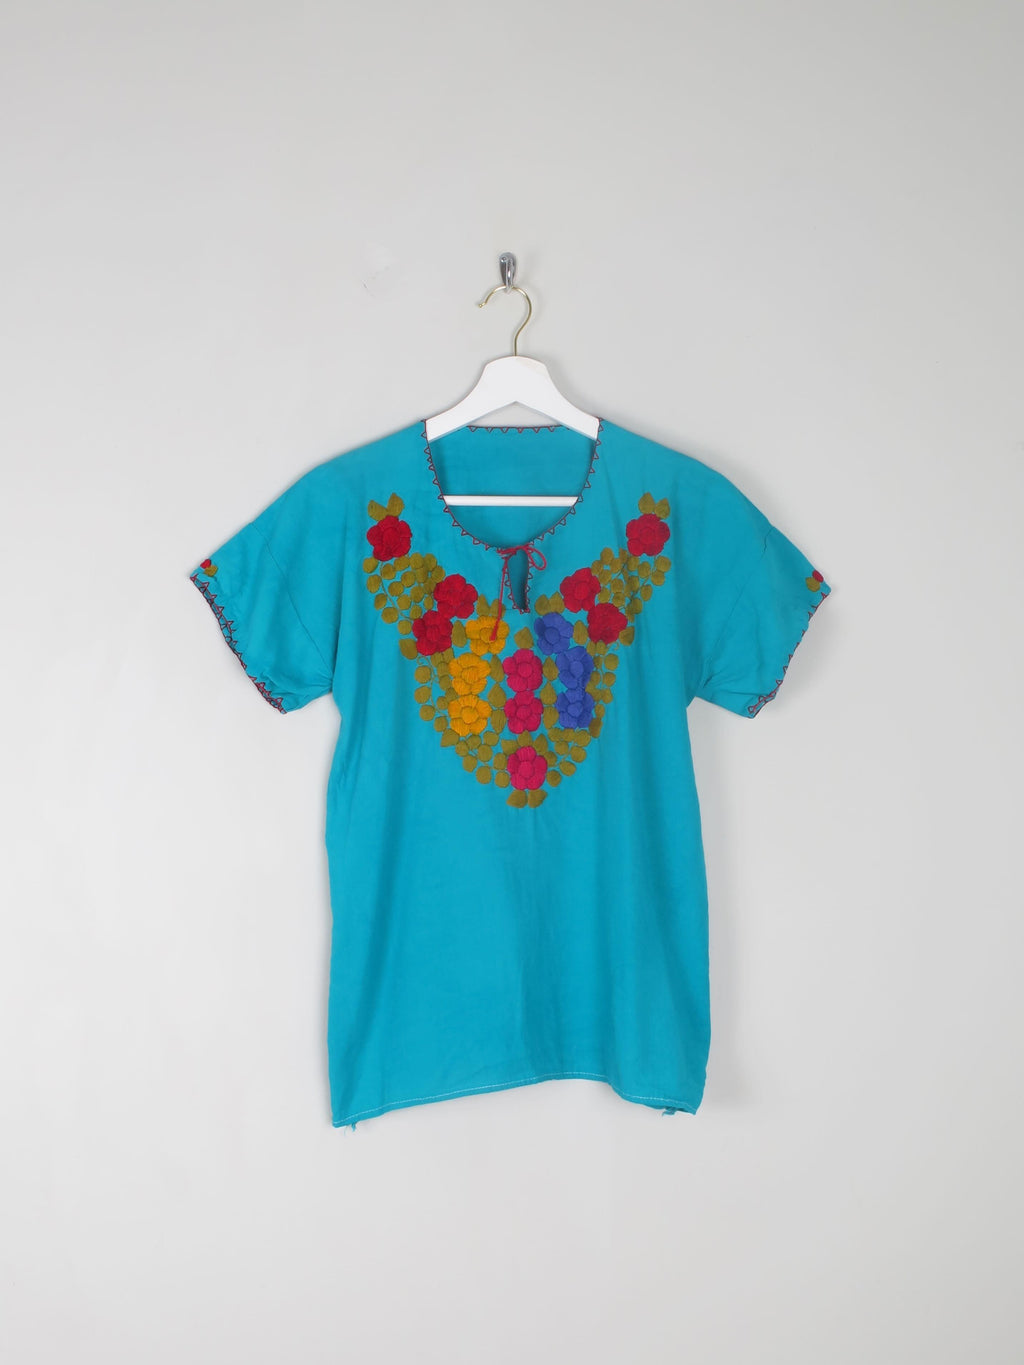 Women's Turquoise Embroidered Vintage Top S/M - The Harlequin